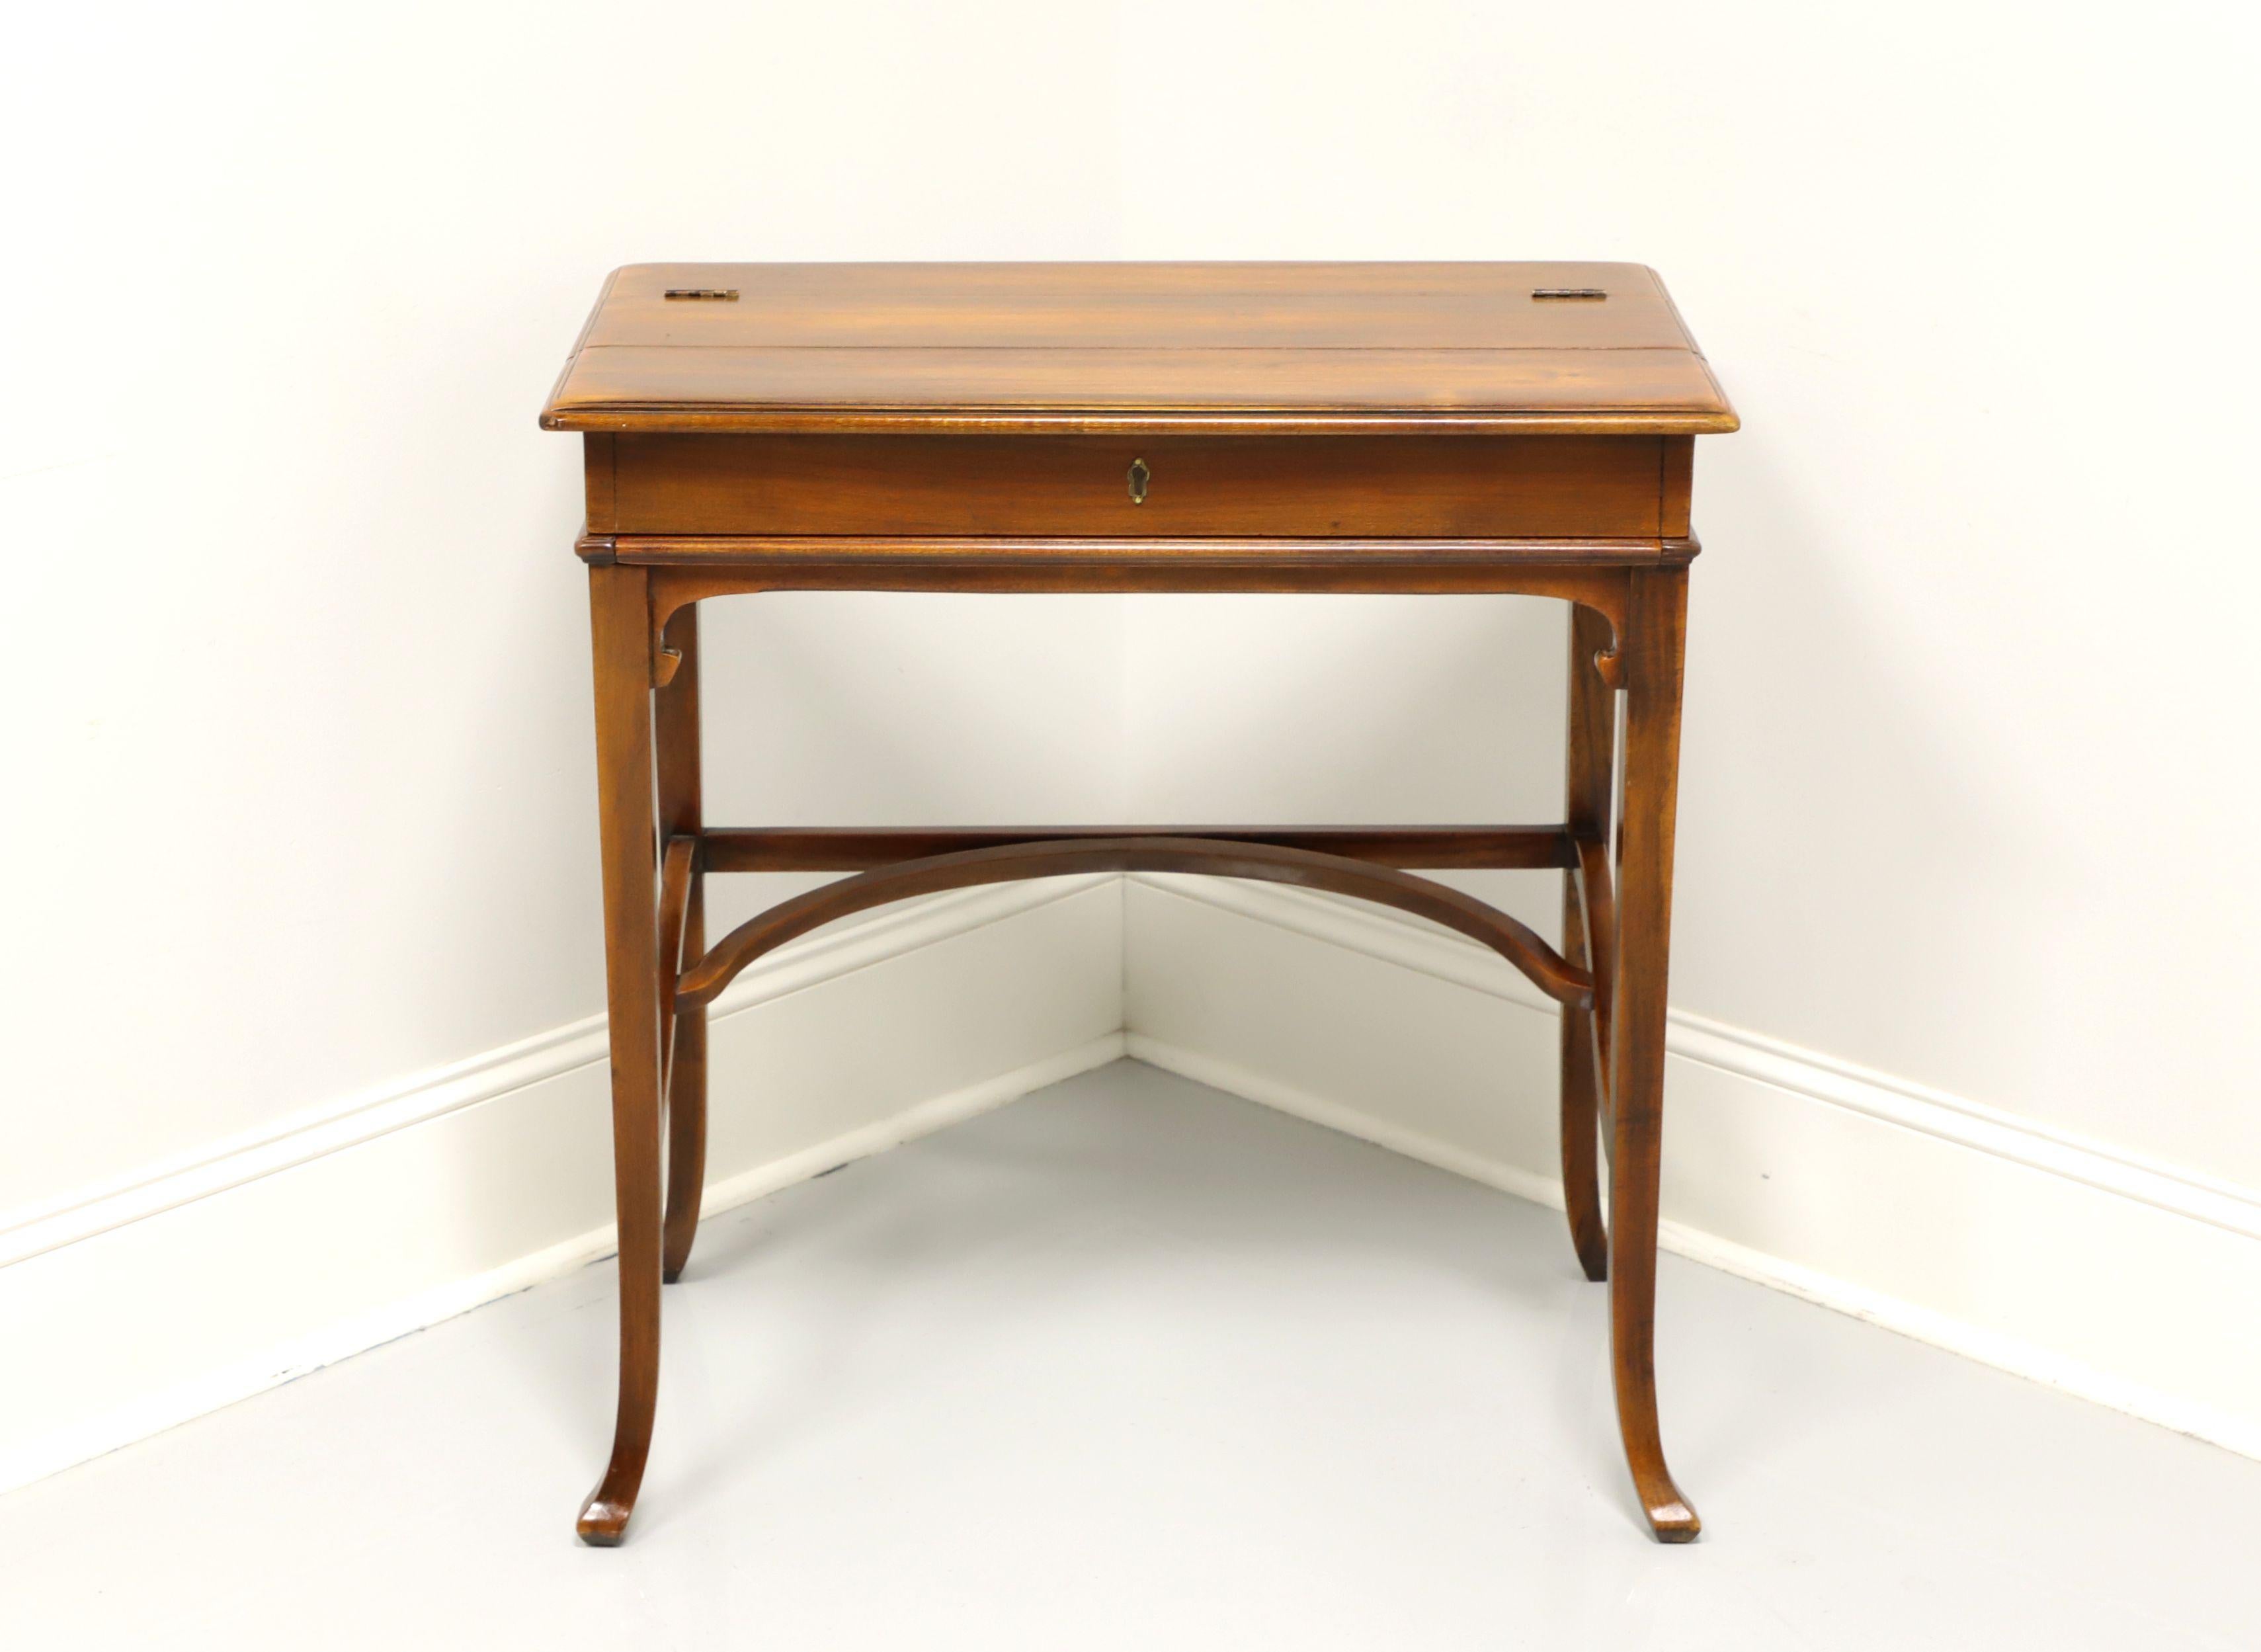 A petite campaign writing desk in the Victorian style by Baker Furniture. Elm wood with brass hinges and faux lockplate. Features a fold back top that slides out the desk surface with cubbies for storage. Made in the USA, in the late 20th